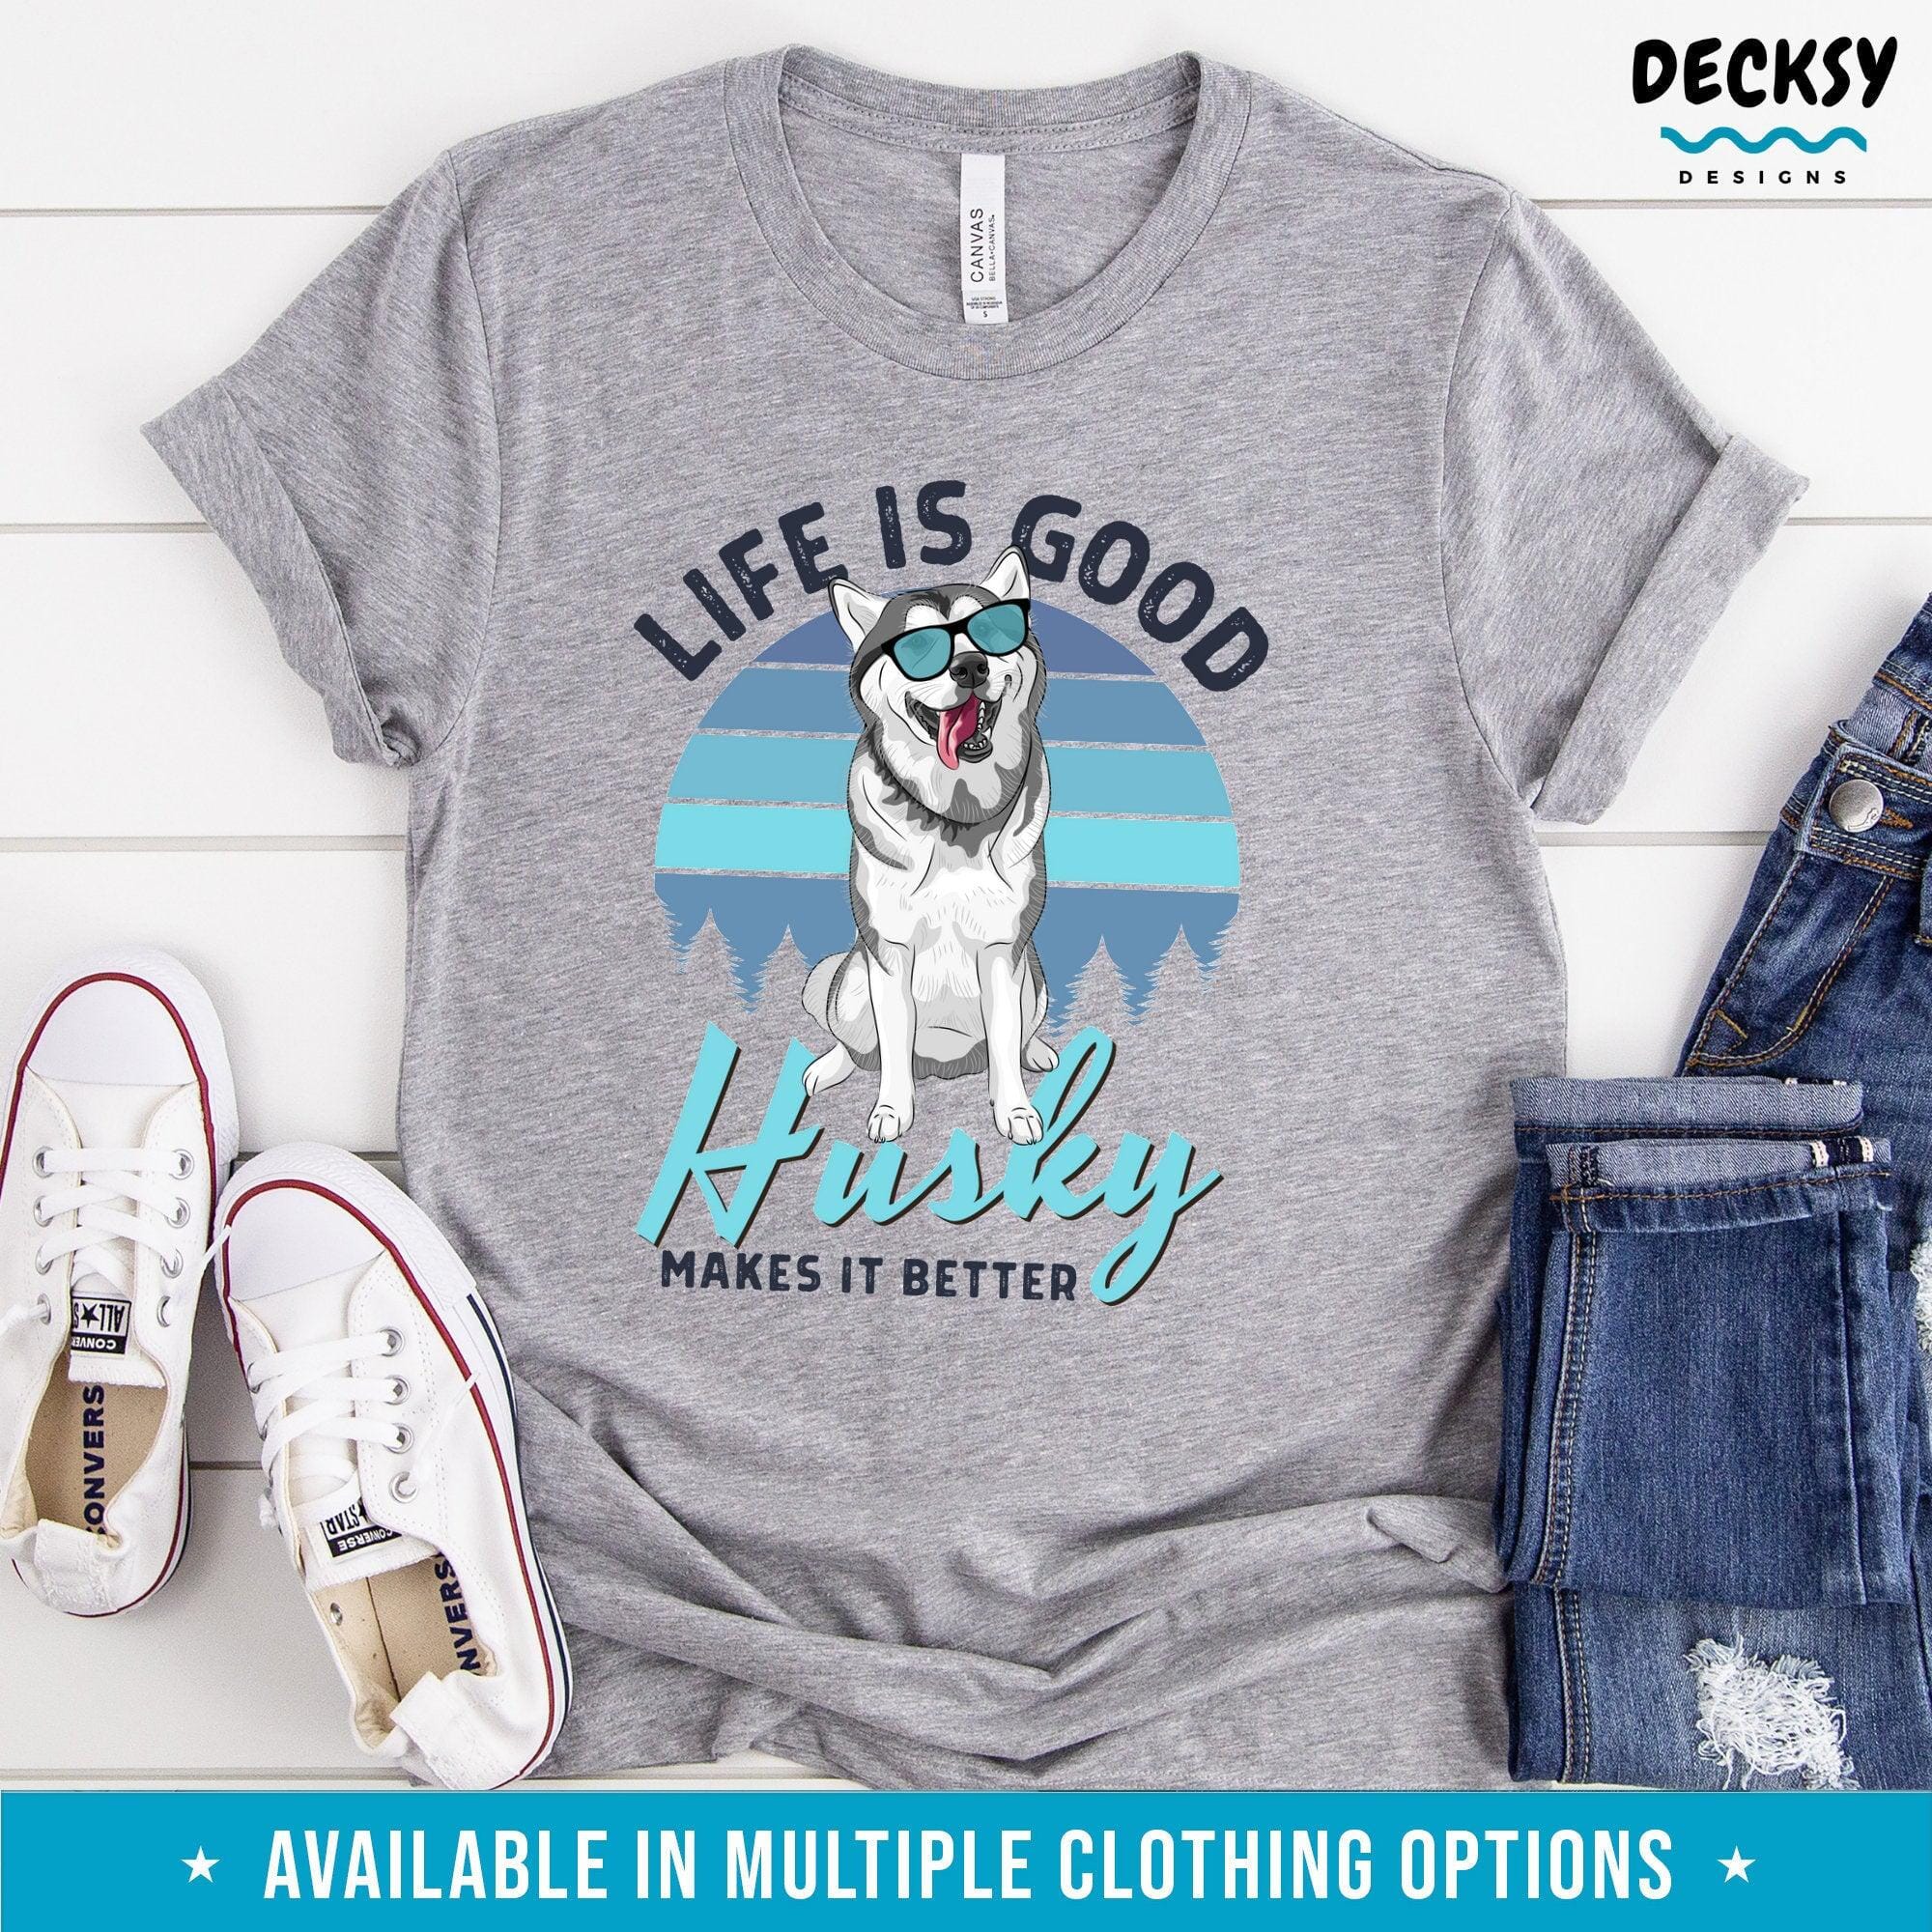 Husky T Shirt, Gift for Siberian Husky Owner-Clothing:Gender-Neutral Adult Clothing:Tops & Tees:T-shirts:Graphic Tees-DecksyDesigns